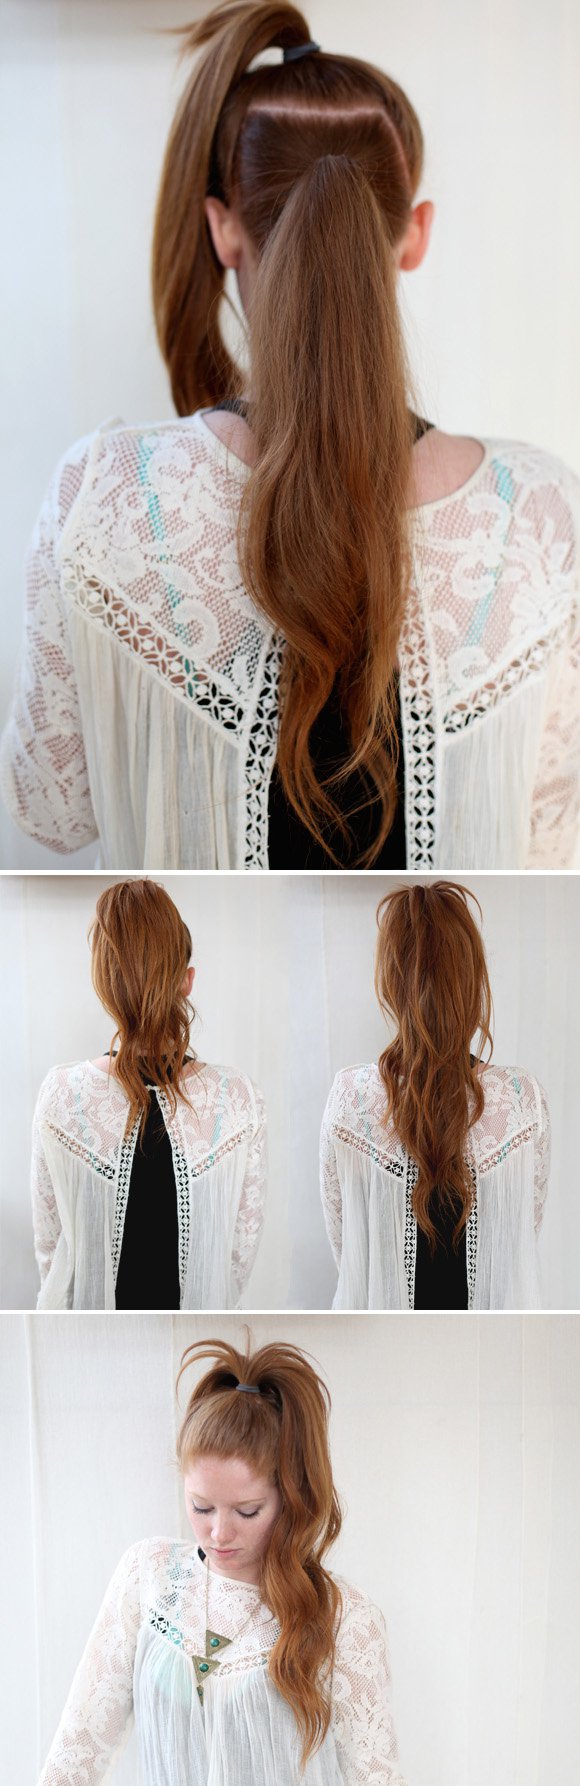 15 Spectacular DIY Hairstyle Ideas For a Busy Morning Made ...